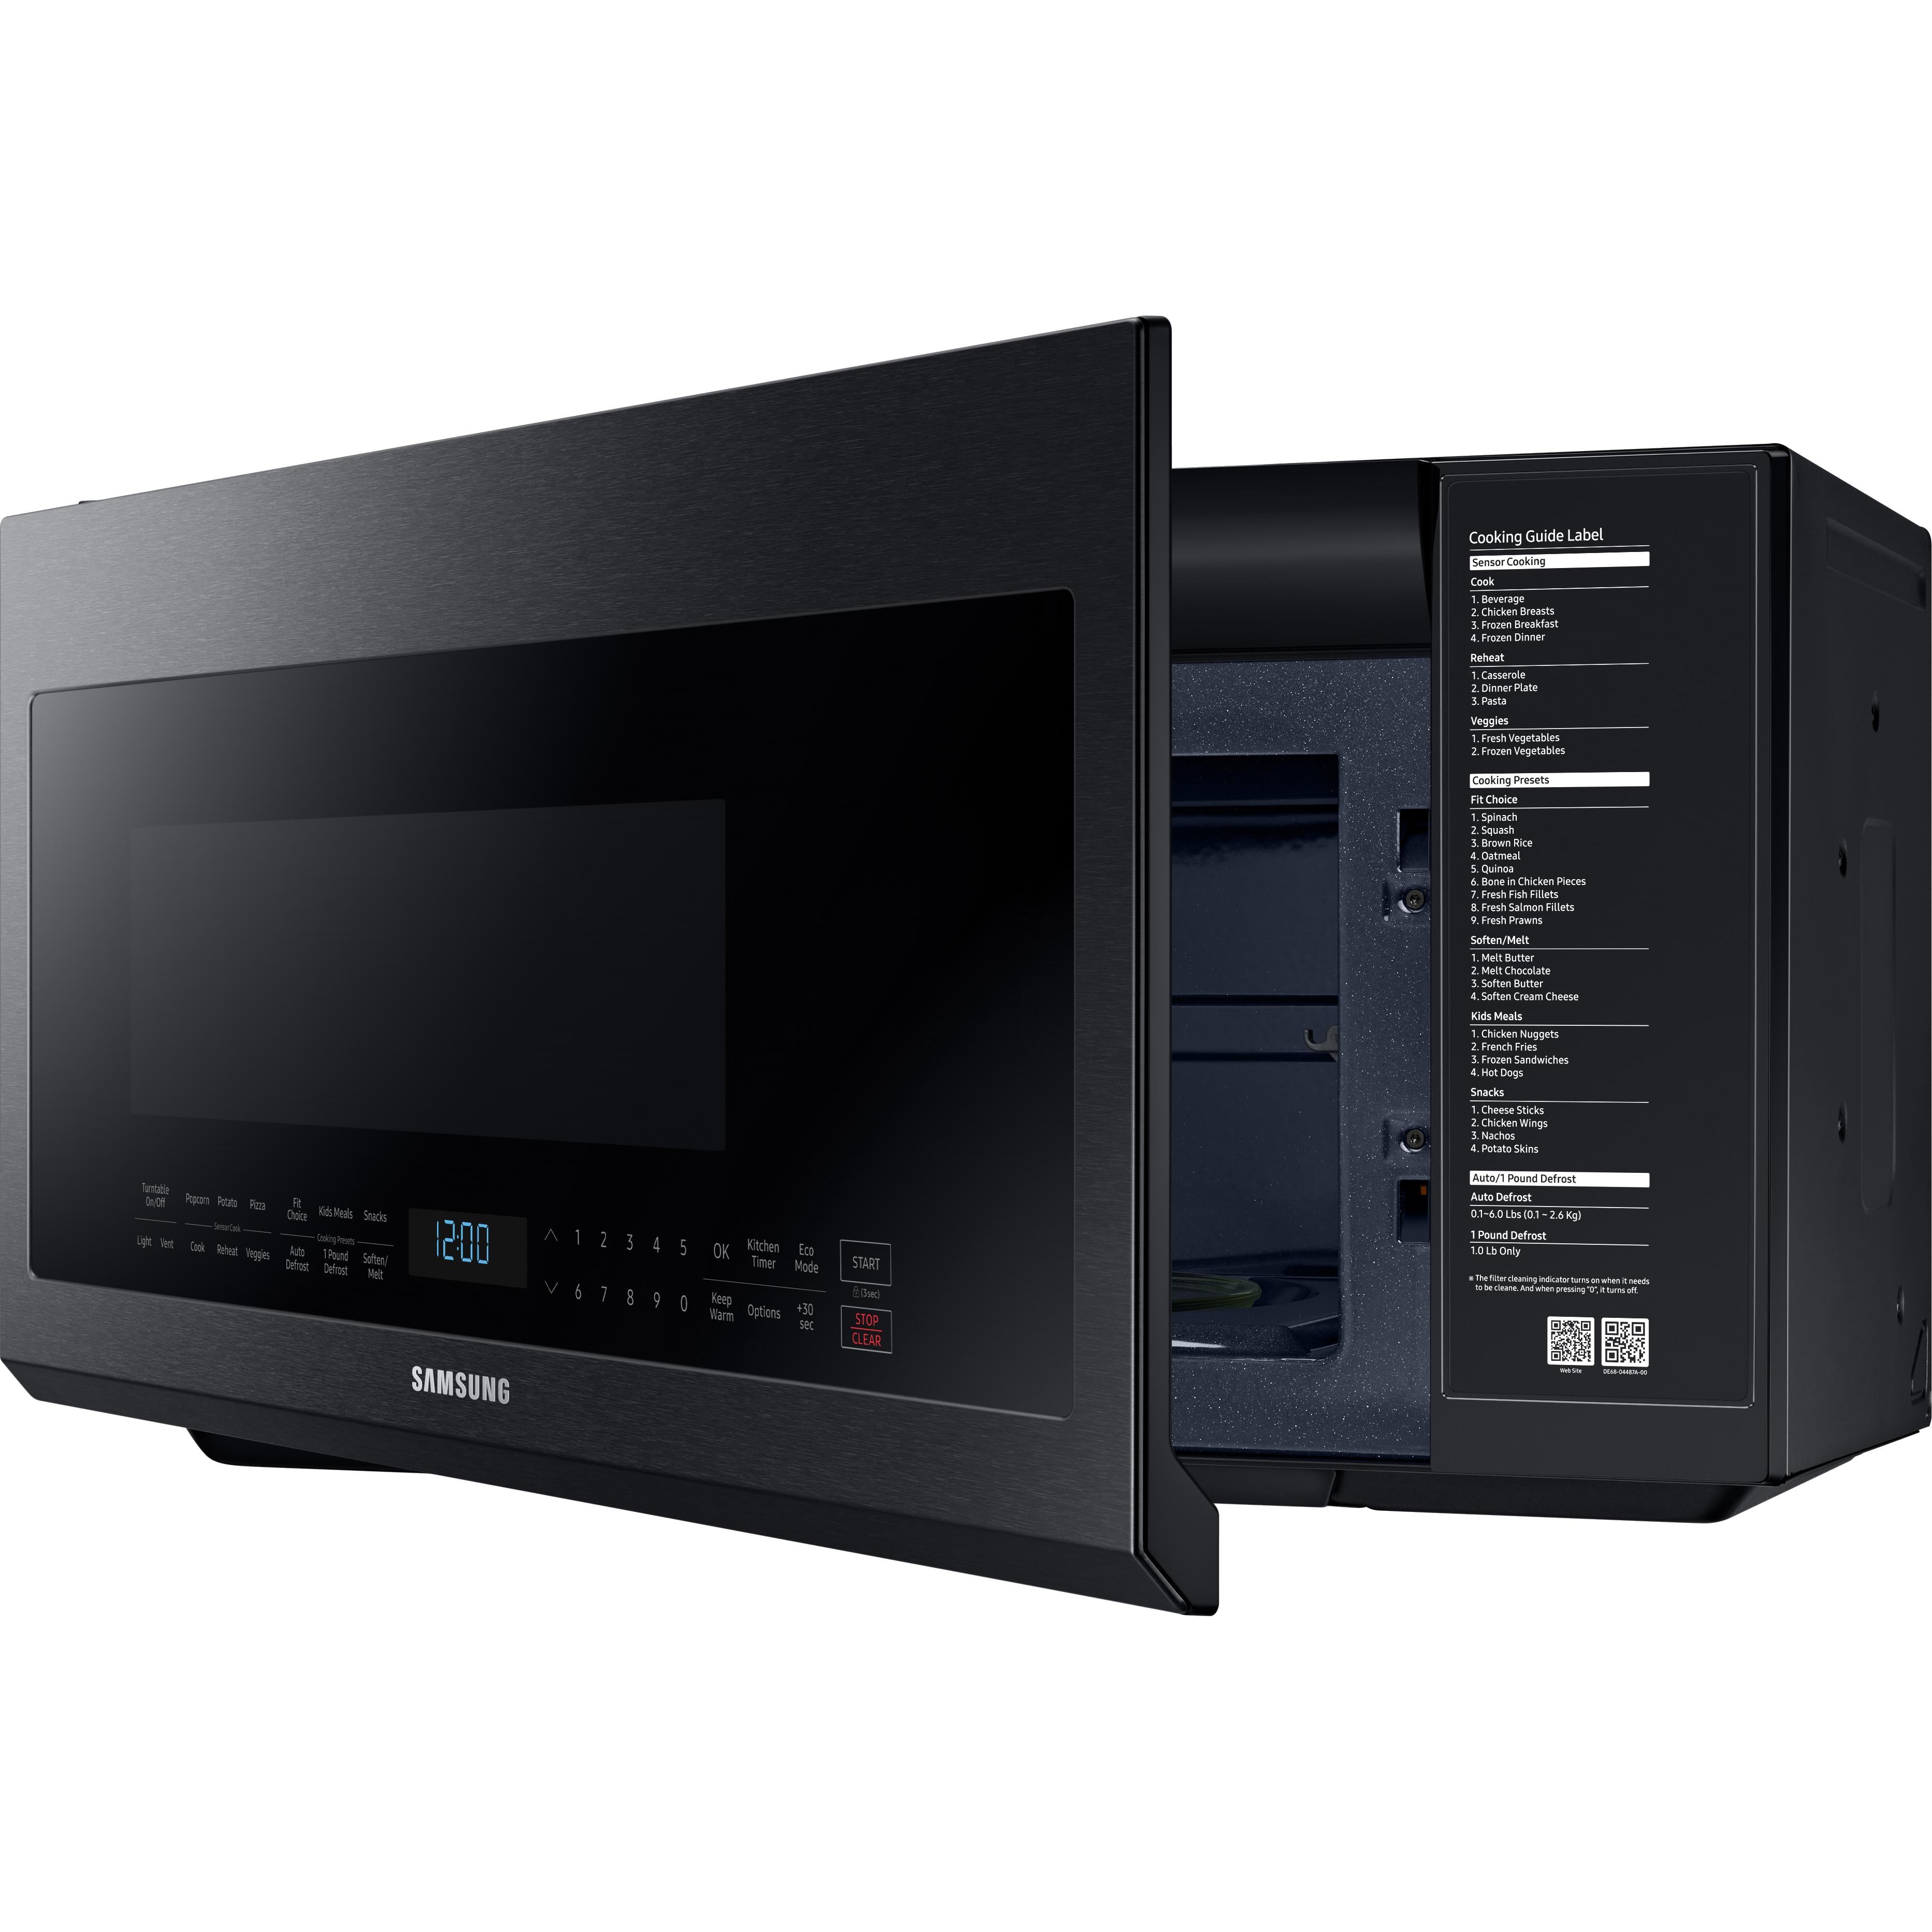 Samsung 30-inch, 2.1 cu.ft. Over-the-Range Microwave Oven with Ventilation System ME21M706BAG/AA